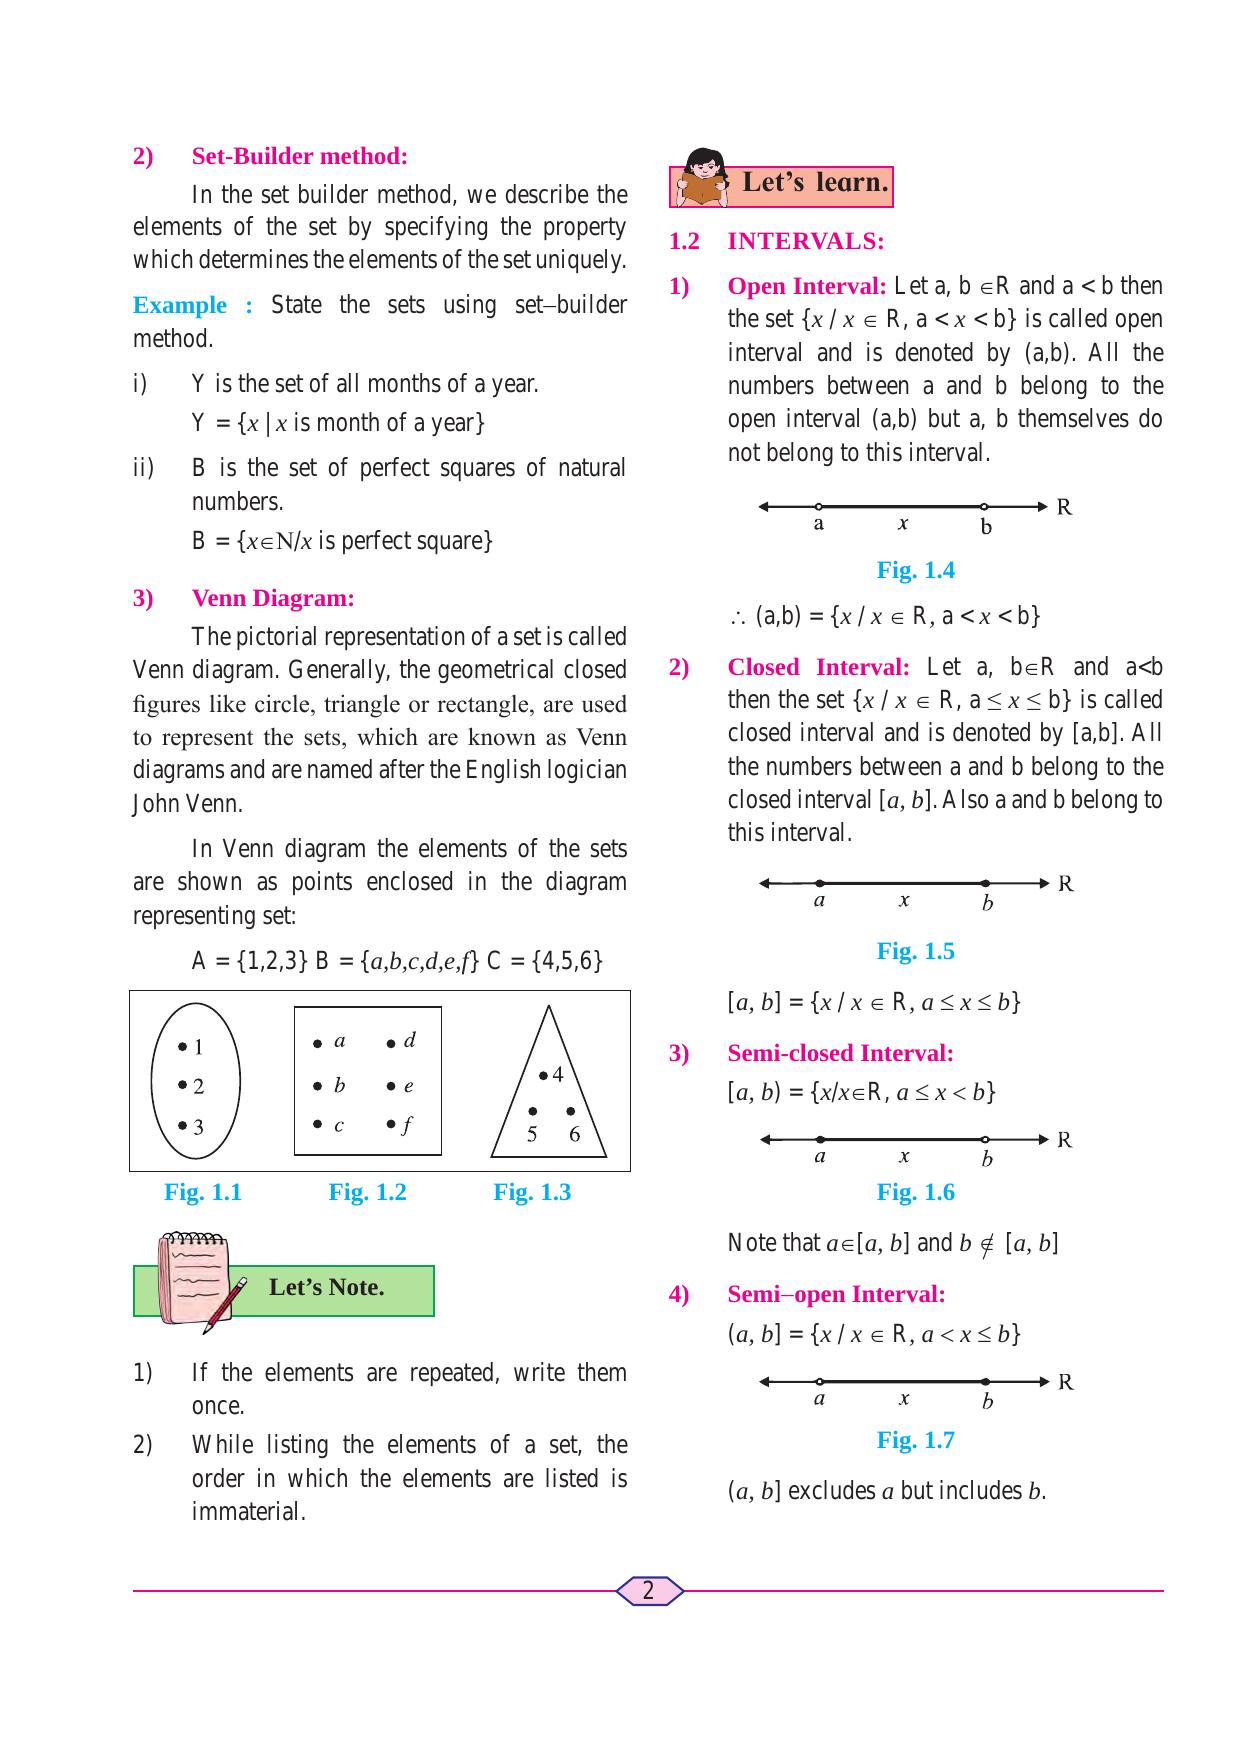 Maharashtra Board Class 11 Maths (Commerce) (Part 1) Textbook - Page 12